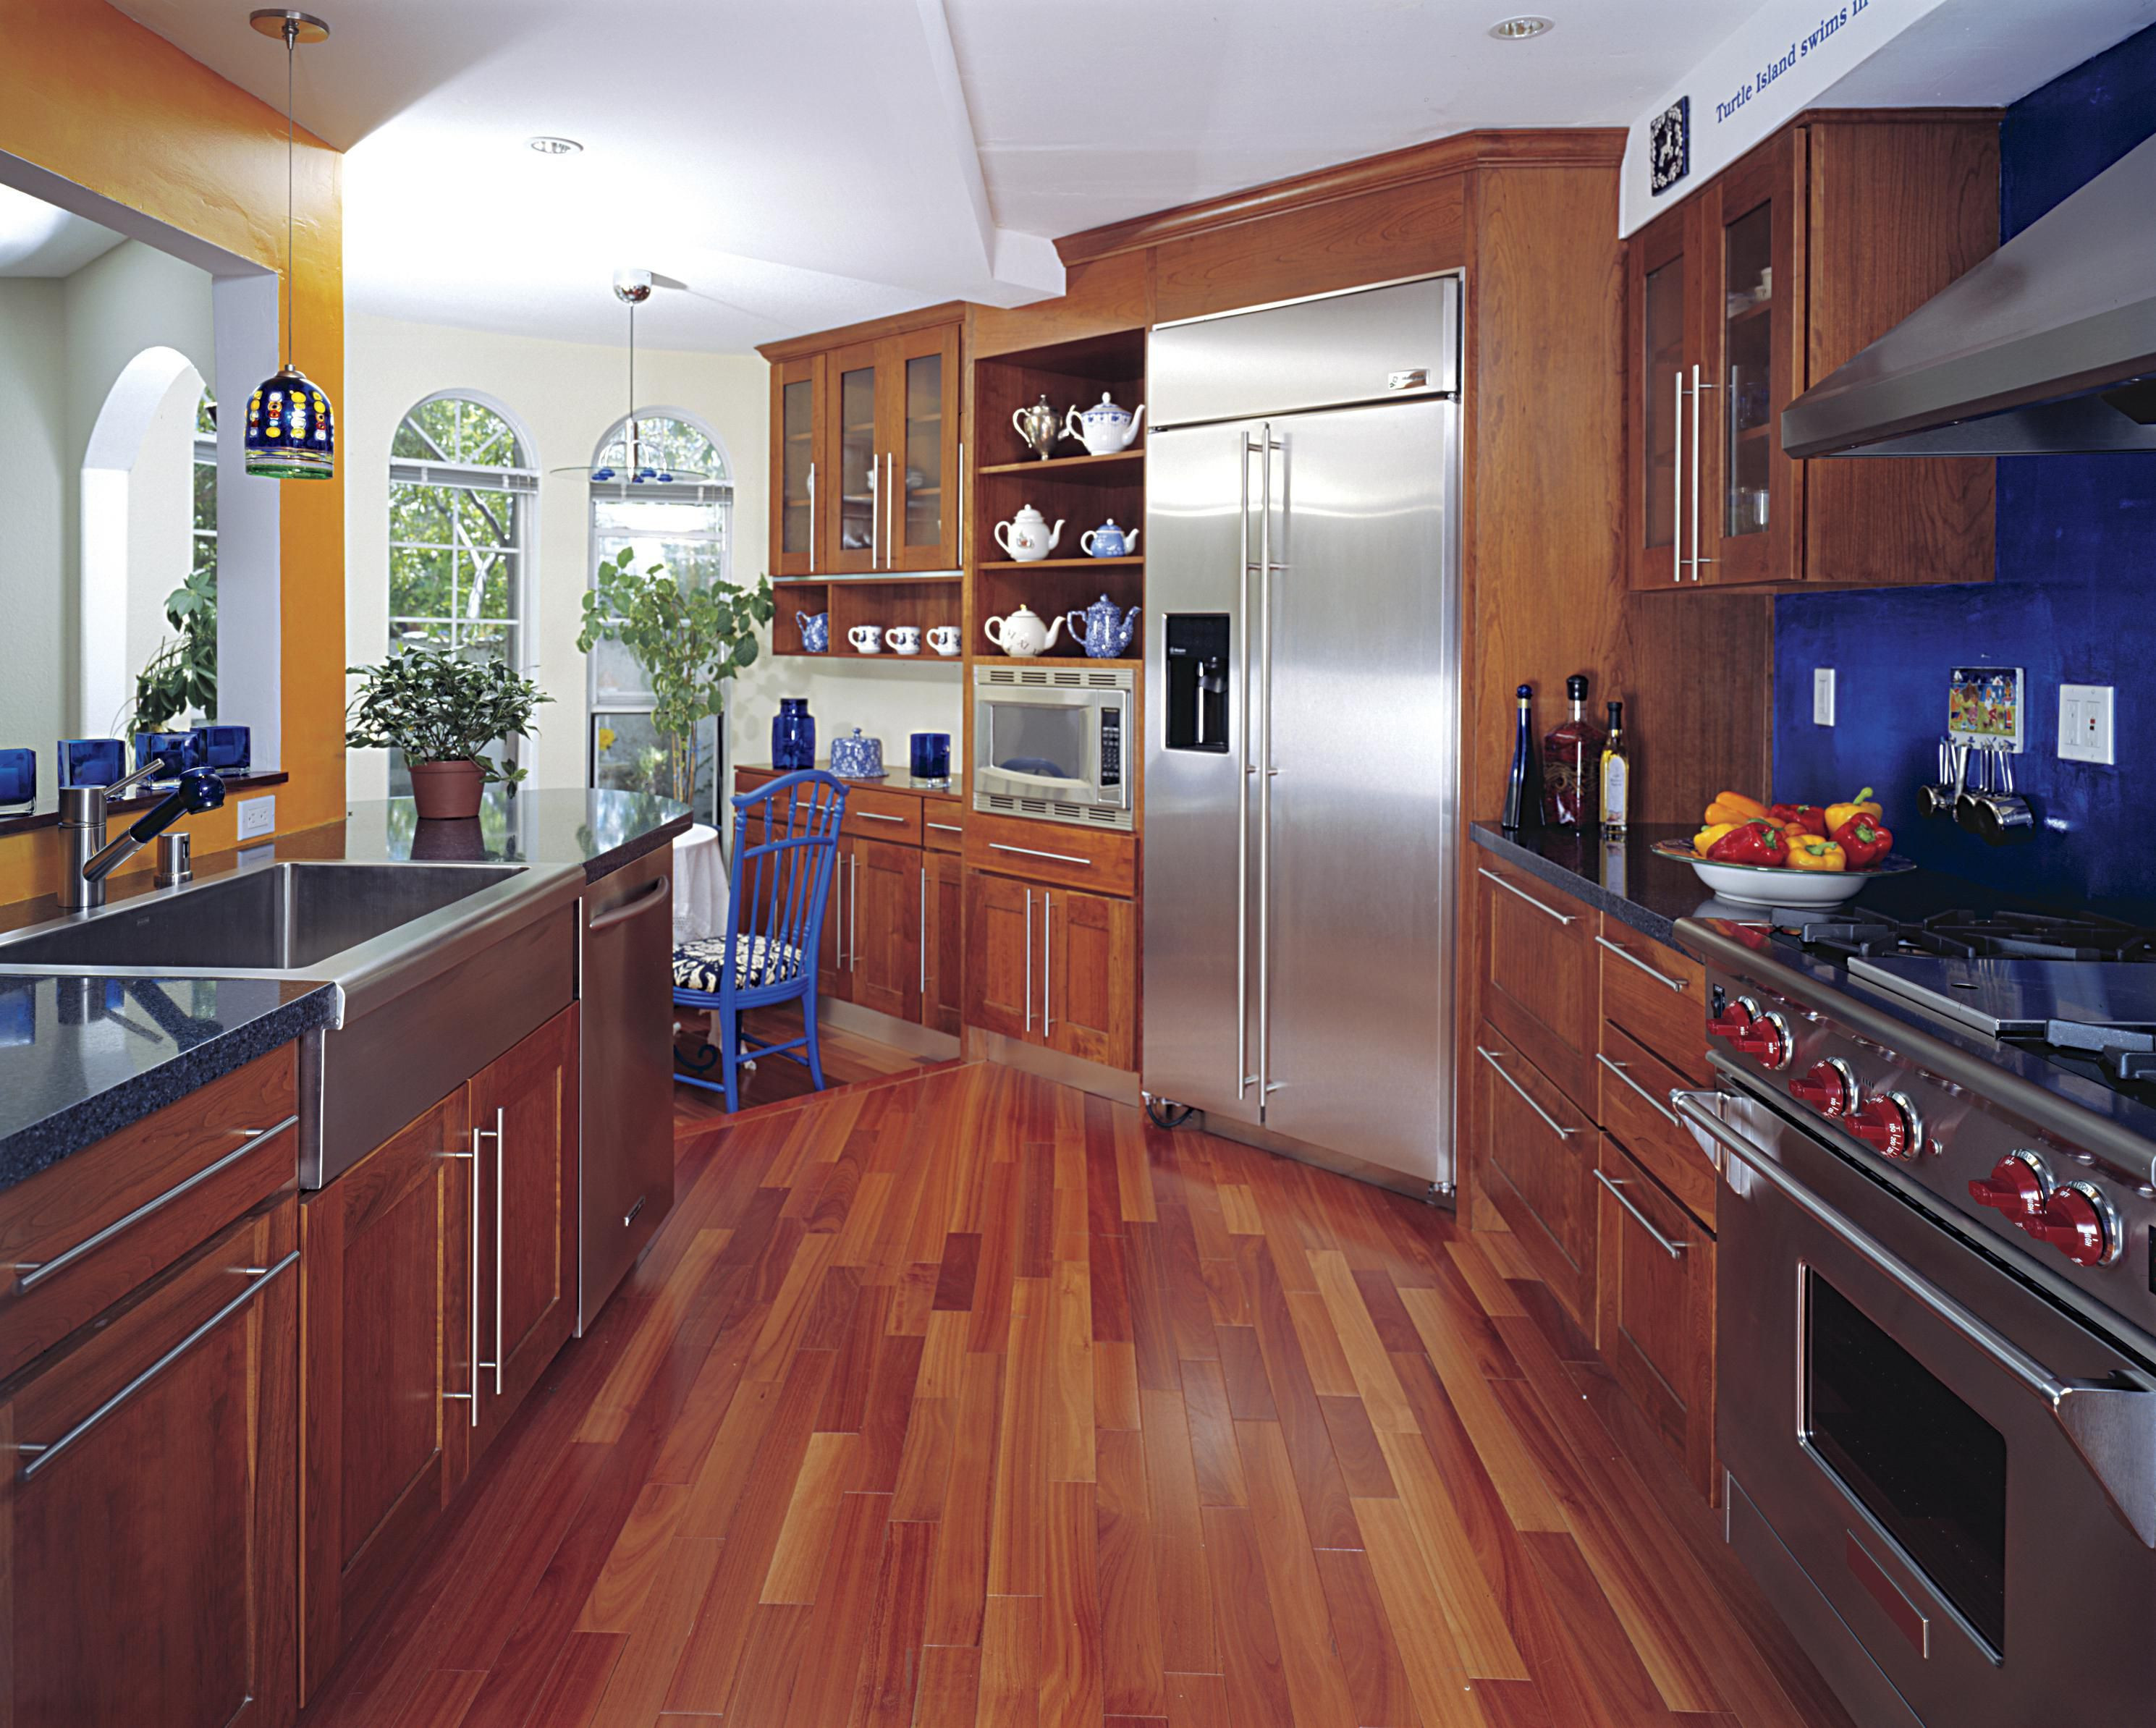 21 Fabulous Average Price to Install Hardwood Floors 2024 free download average price to install hardwood floors of hardwood floor in a kitchen is this allowed with 186828472 56a49f3a5f9b58b7d0d7e142